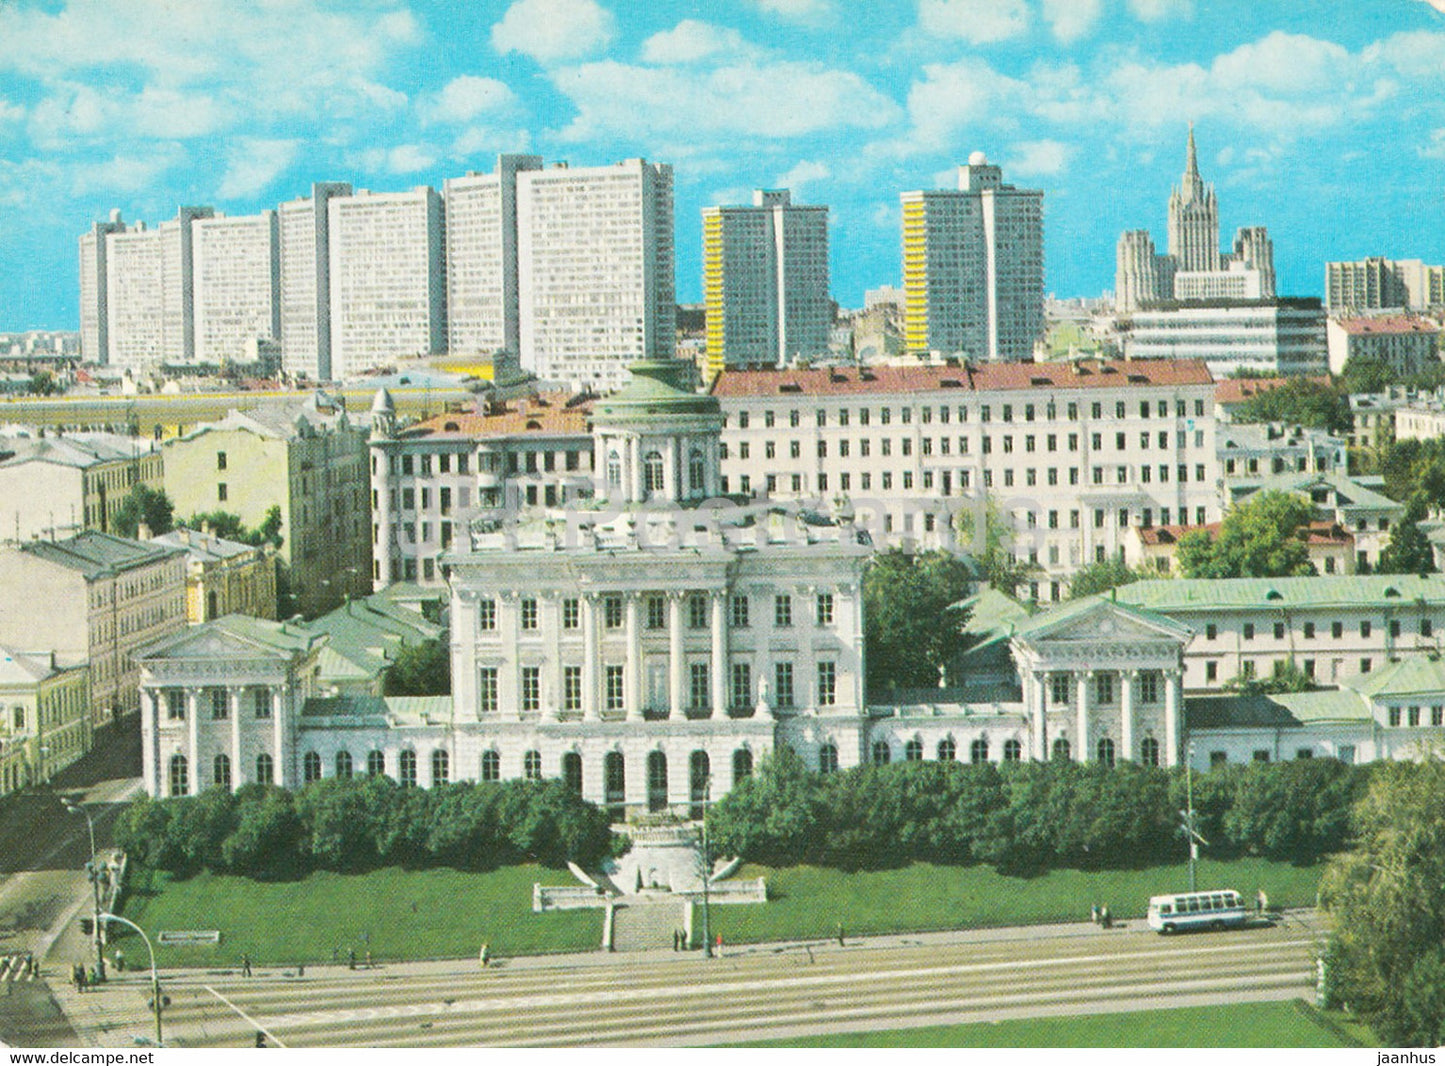 Moscow - City Panorama - postal stationery - 1977 - Russia USSR - used - JH Postcards